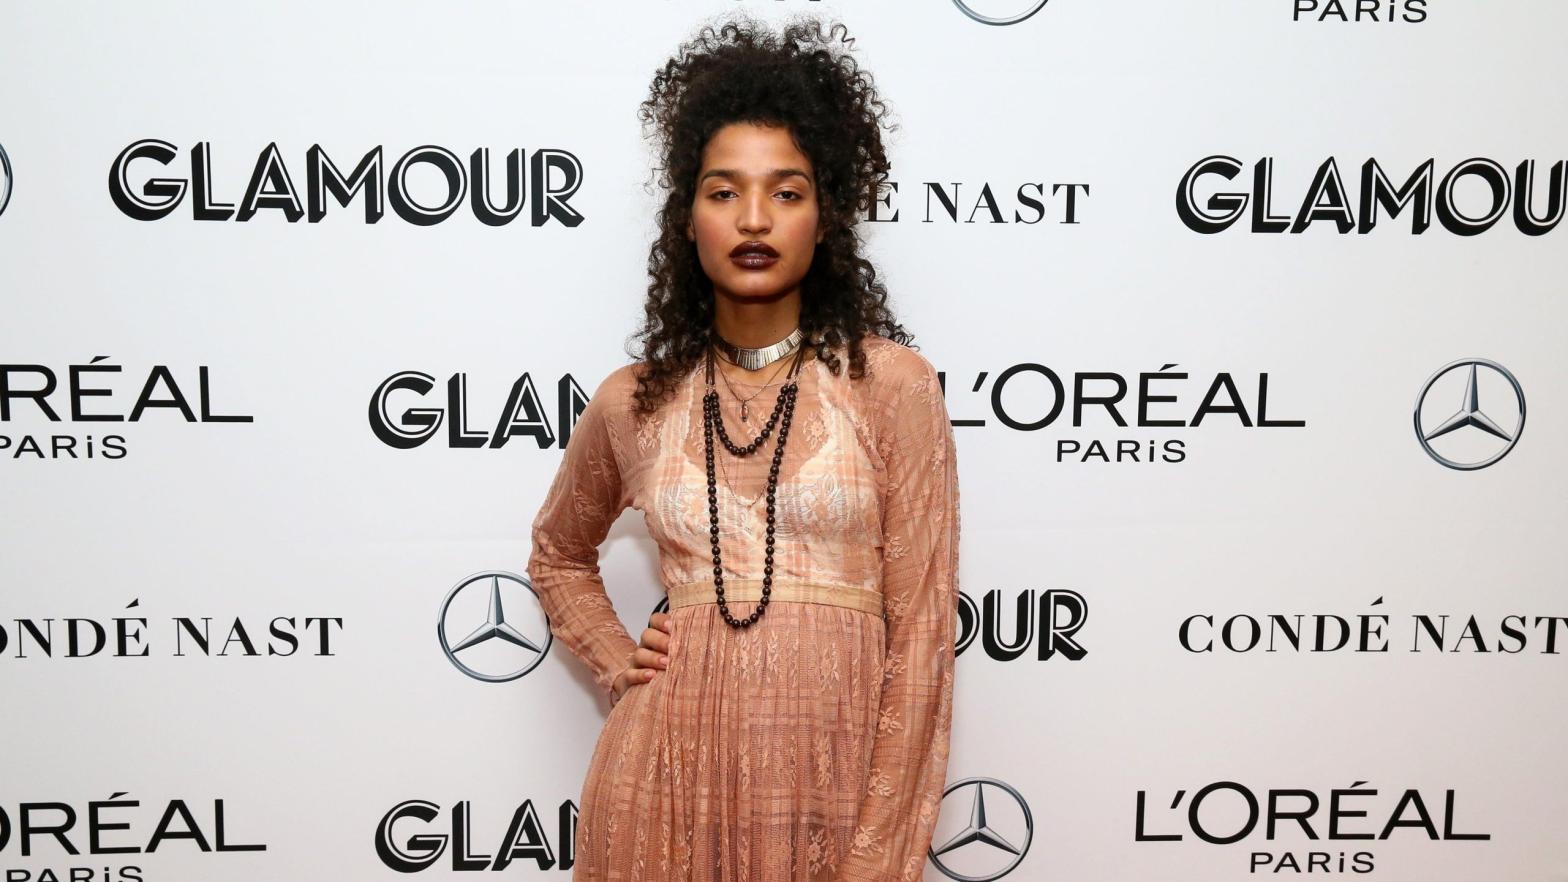 Indya Moore attends the 2018 Glamour Women Of The Year Summit: Women Rise in New York City. (Photo: Astrid Stawiarz/Getty Images for Glamour, Getty Images)